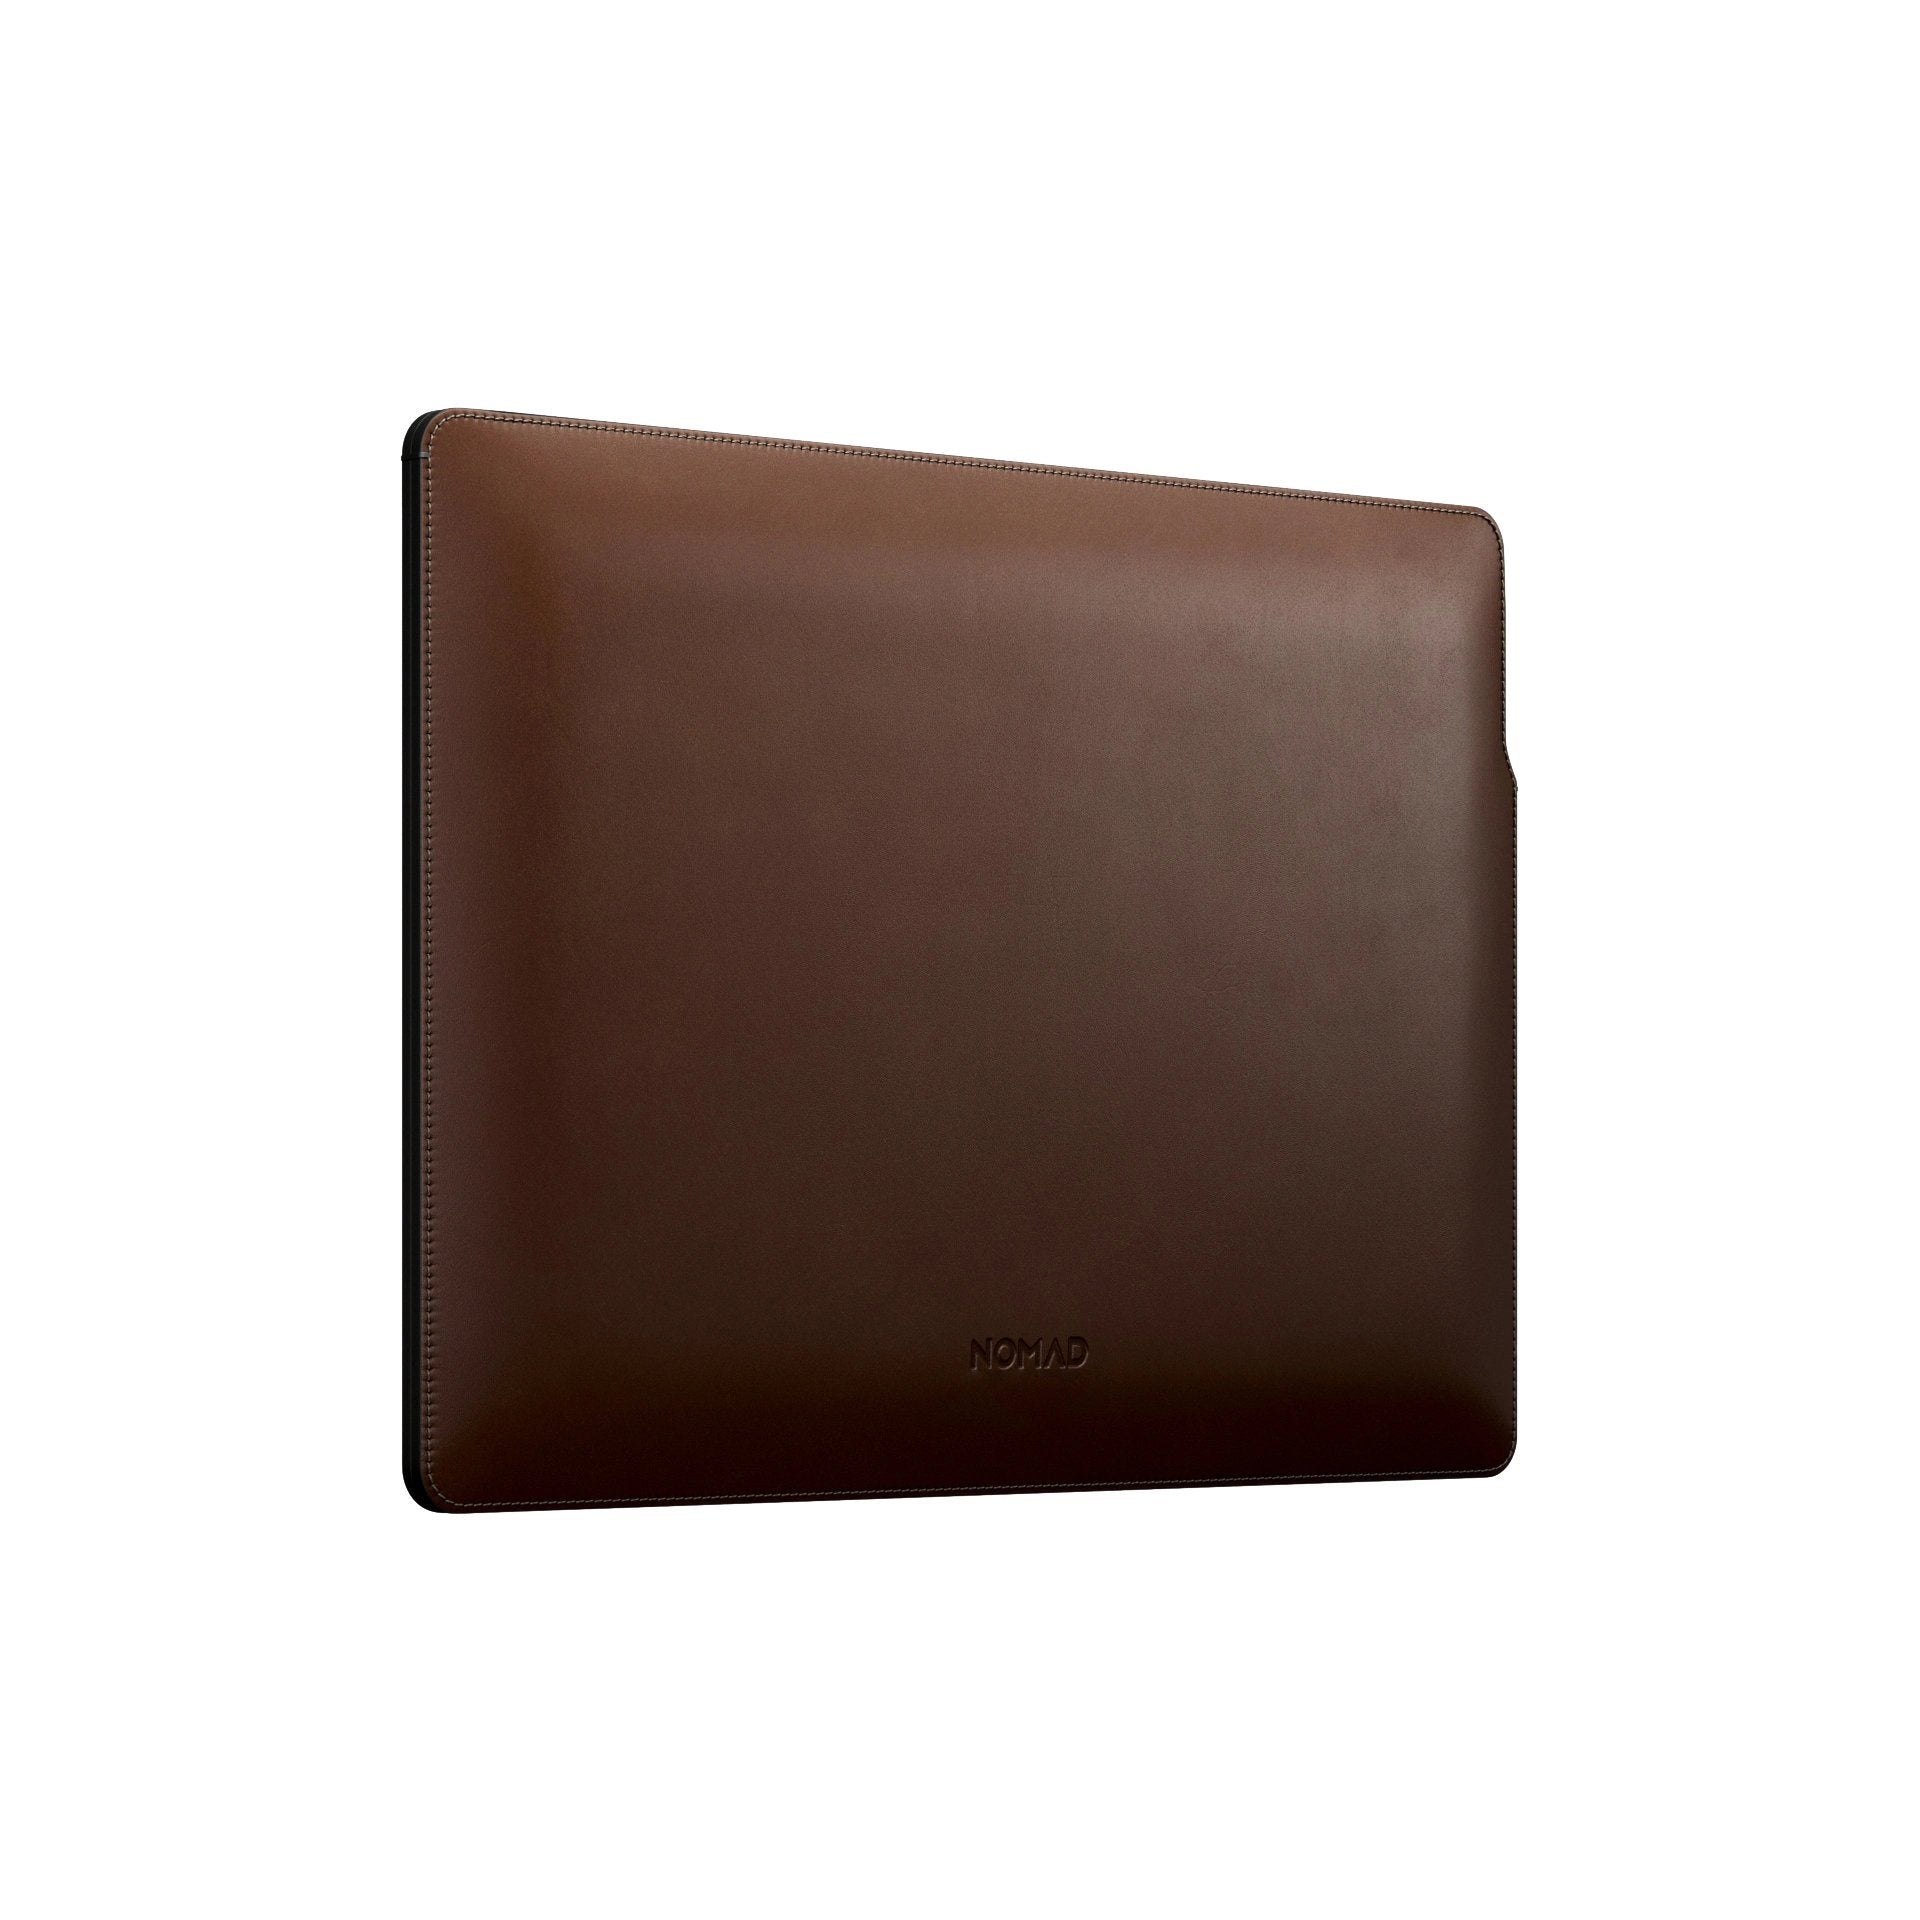 NOMAD Horween Leather Sleeve for MacBook Pro 16", Rustic Brown Default NOMAD 